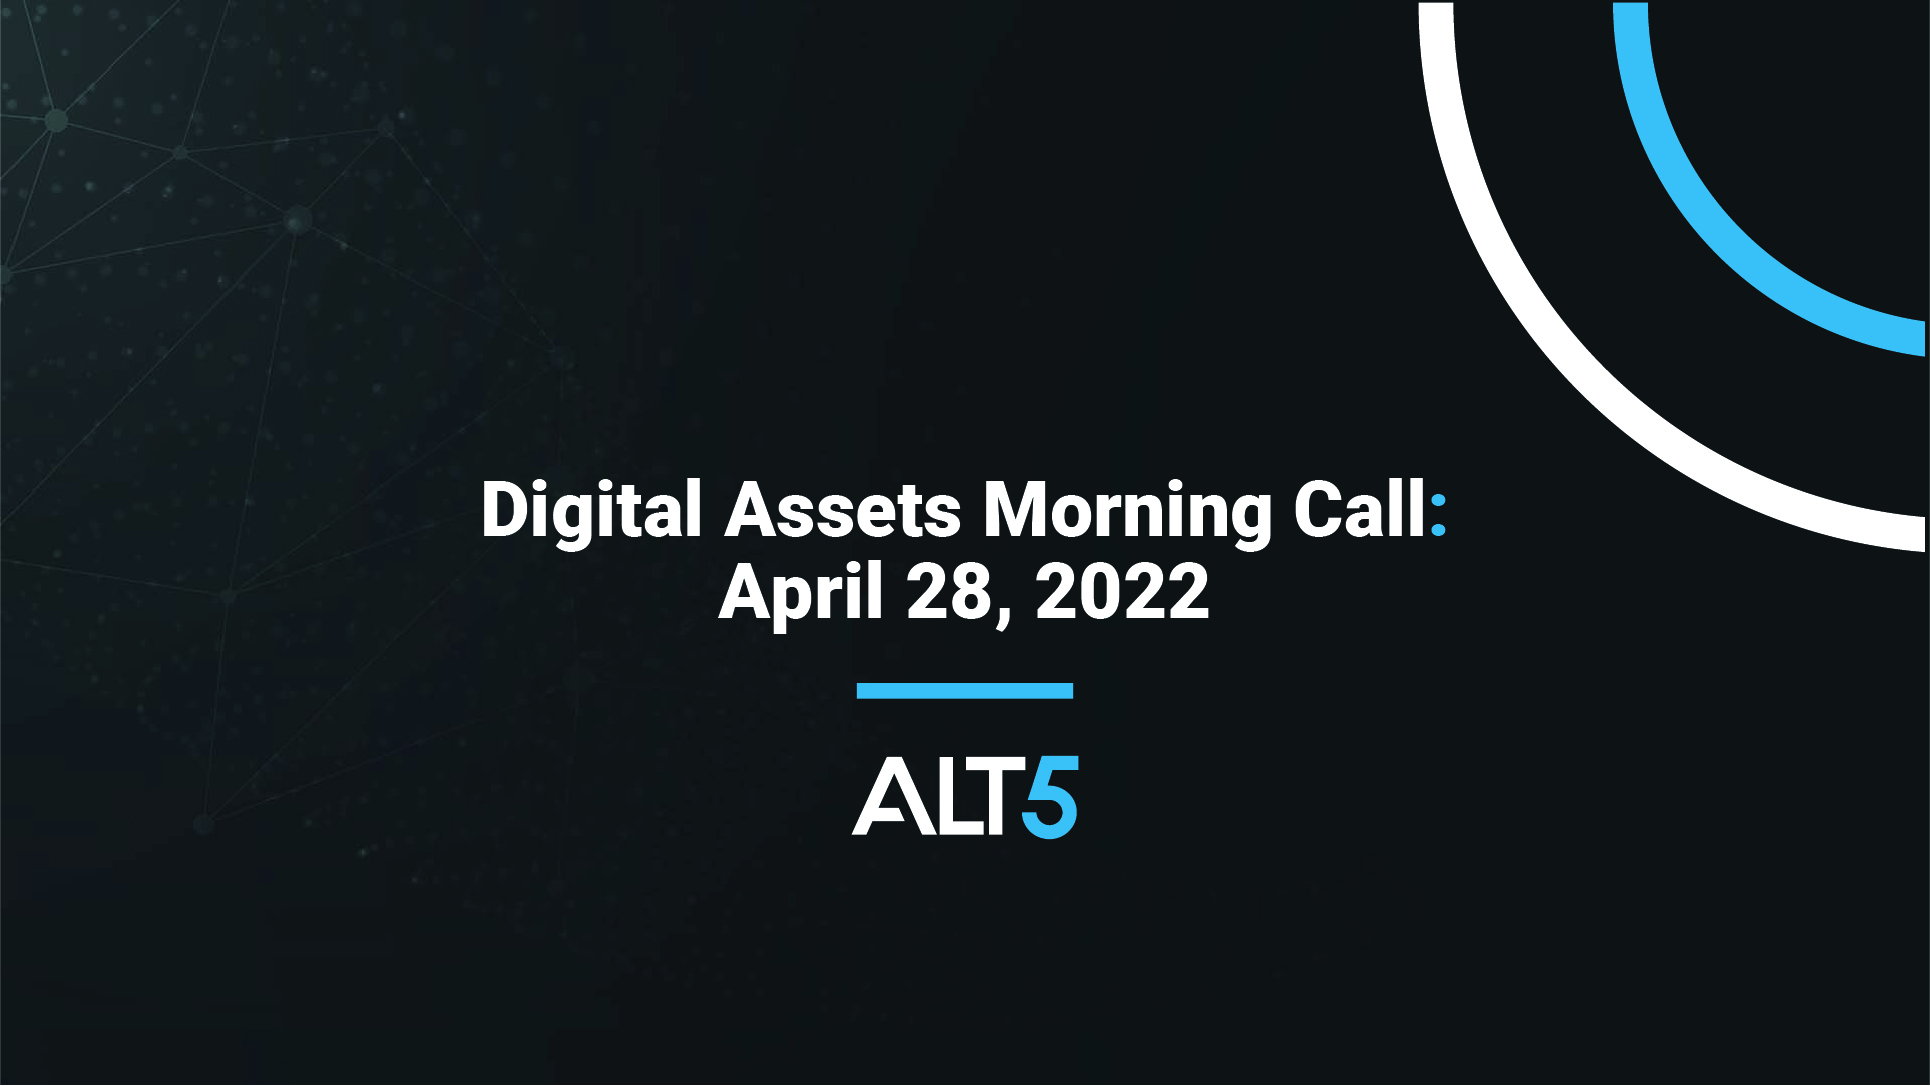 Digital Assets Morning Call: April 28 2022 - More on Fidelity’s plan to offer crypto in 401Ks; US growth falls short of expectations